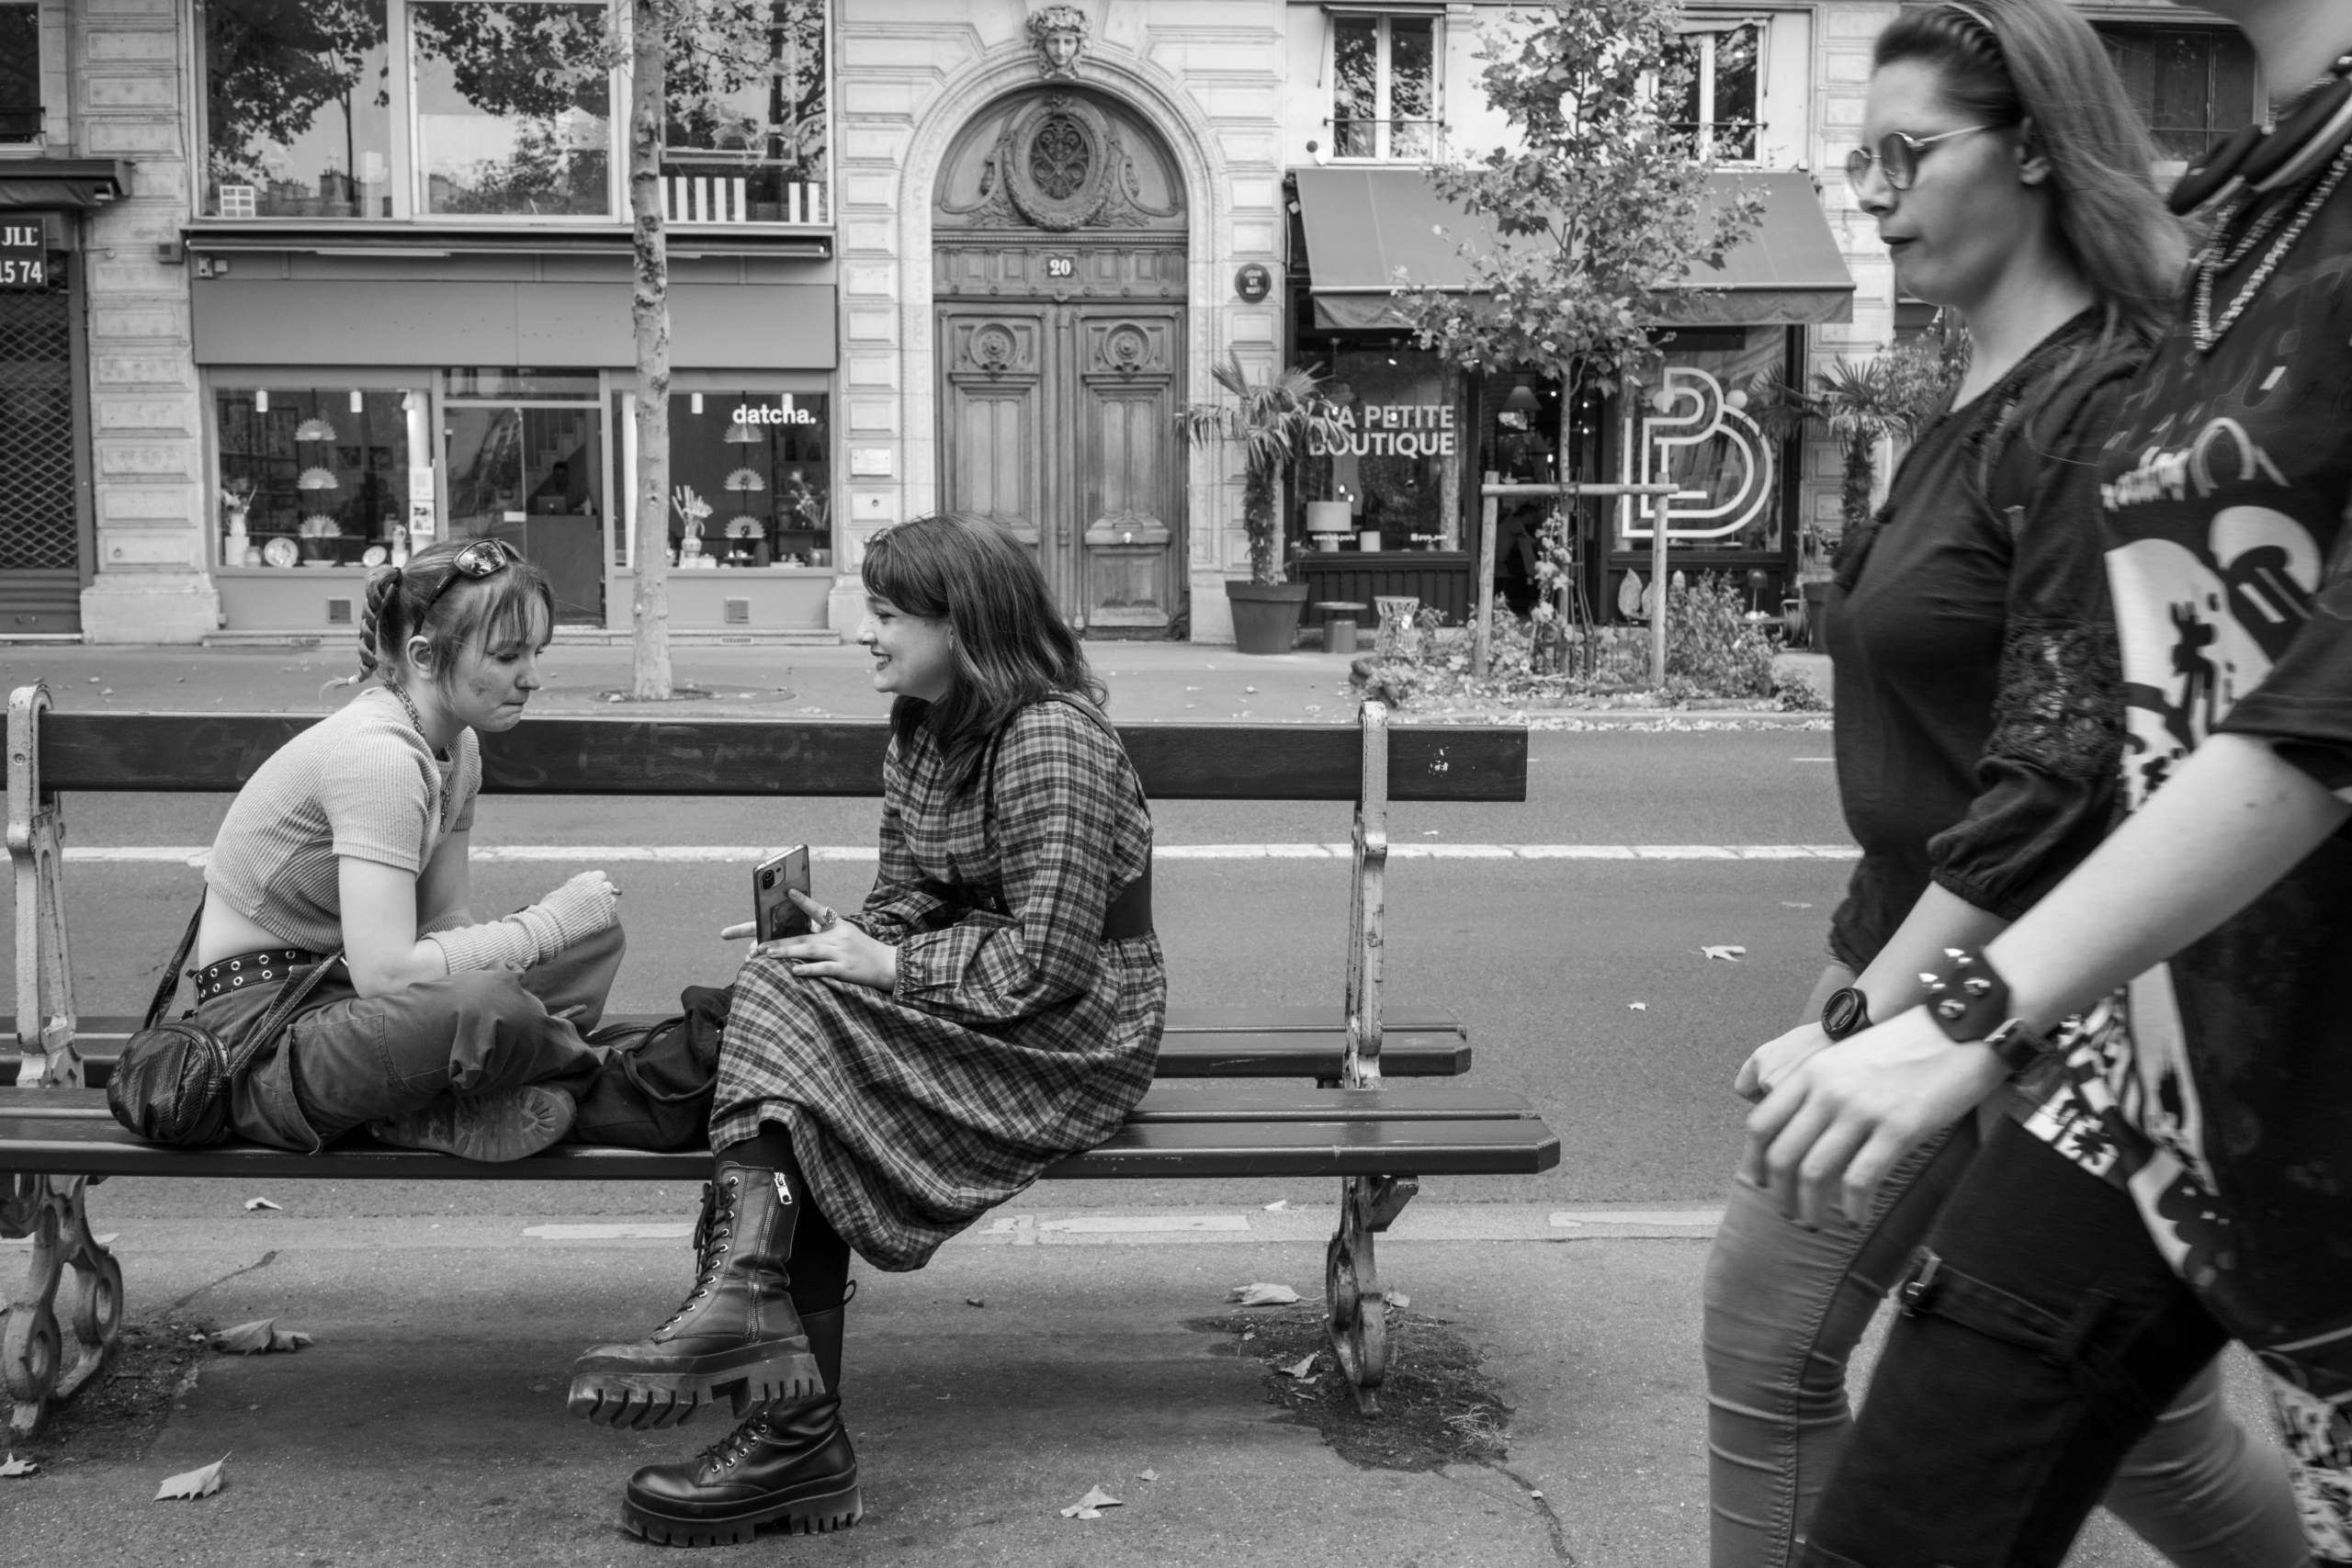 Couple on Bench in paris